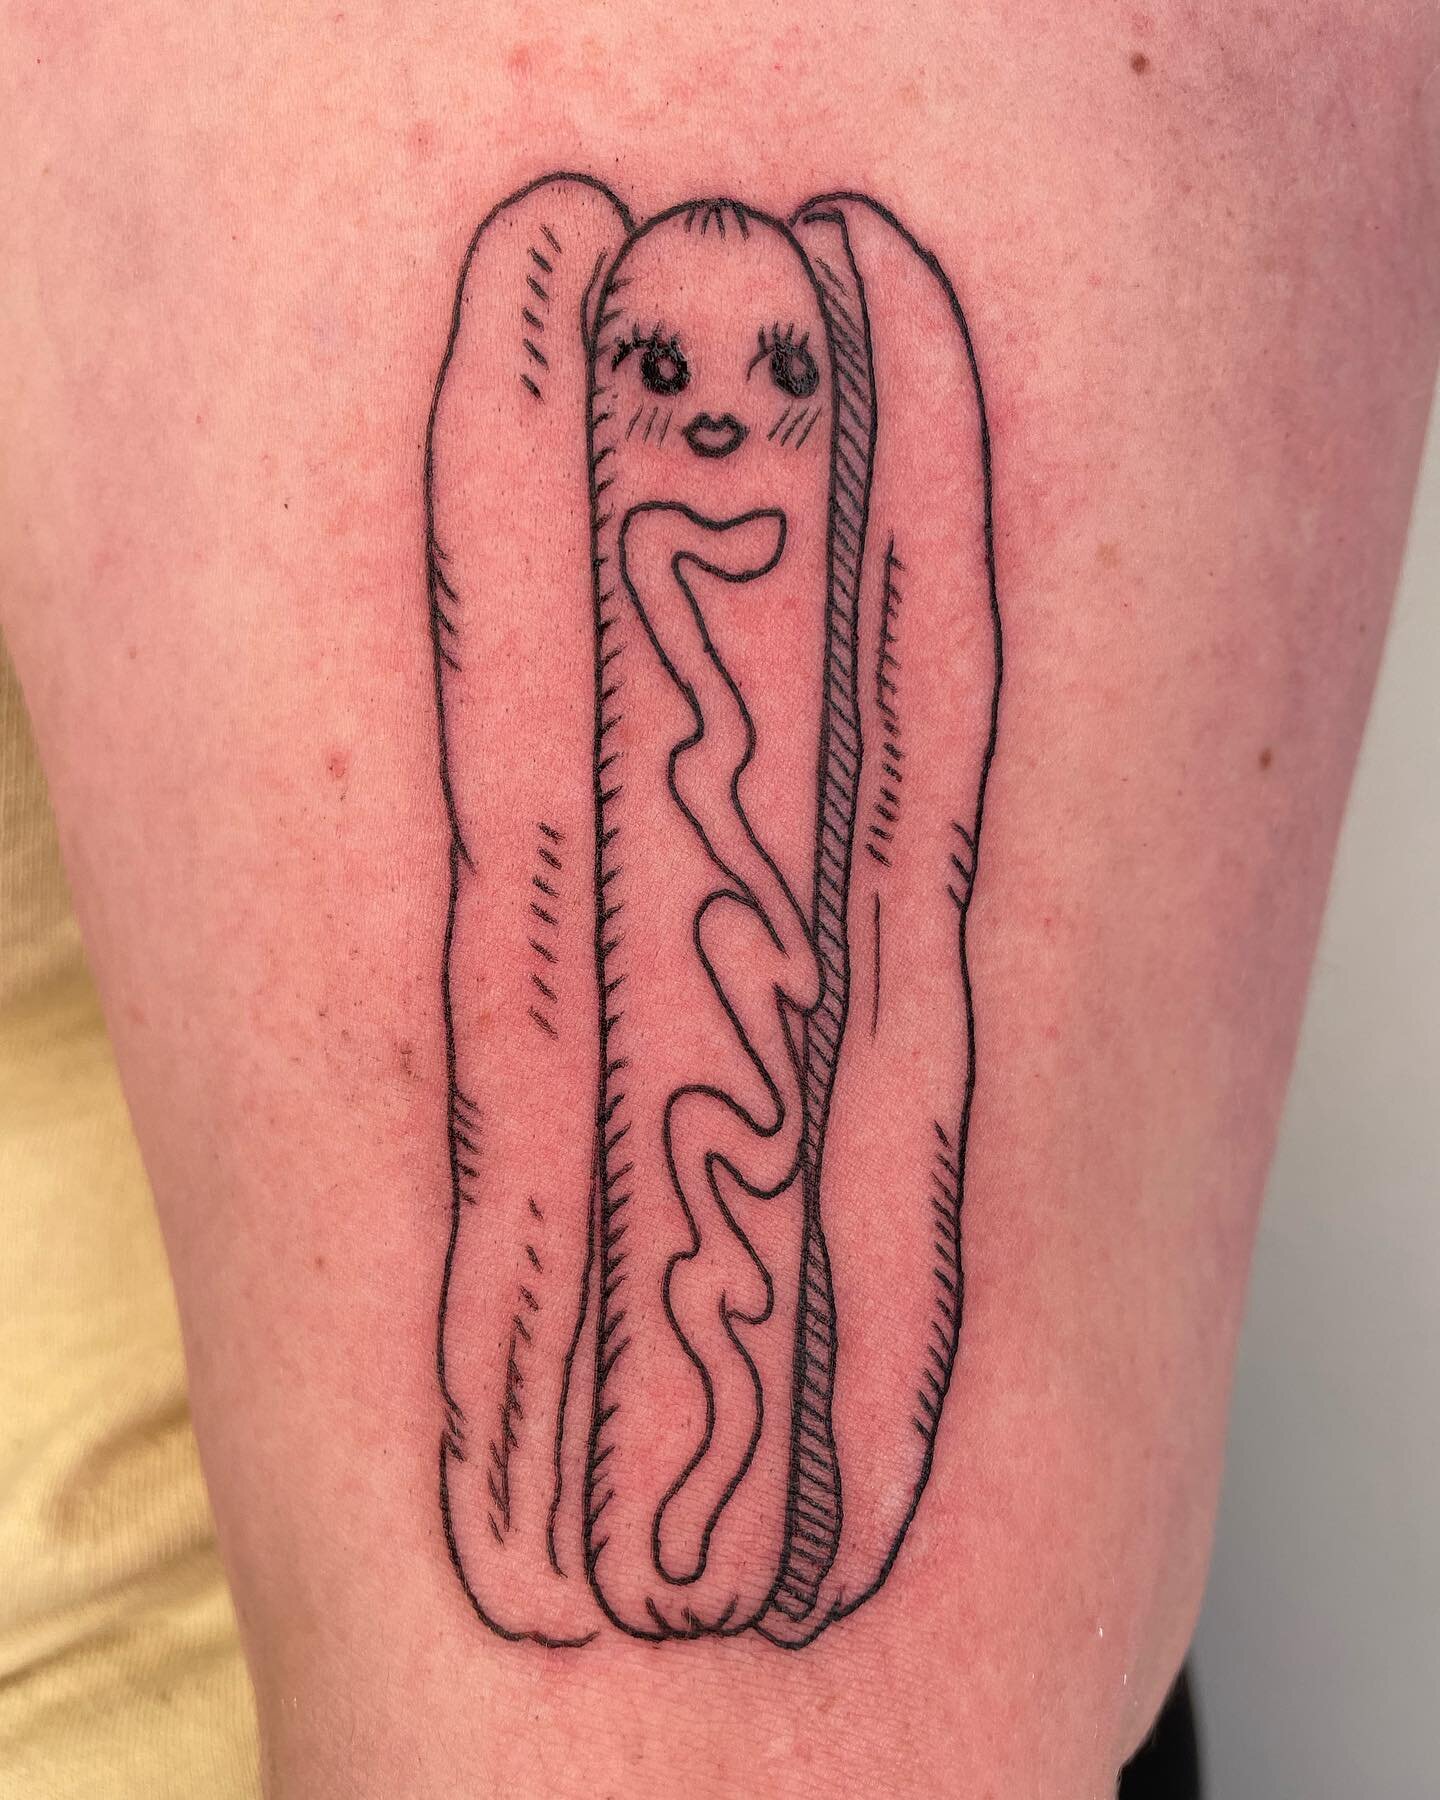 Had so much fun doing some friend tattoos for Emma and Avery the other day! Love how both turned out; this is the first time I&rsquo;ve done the hot dog and it was fabulous. Swipe through to see Avery&rsquo;s cat tat too! #cute #cuttetattoos #weirdta